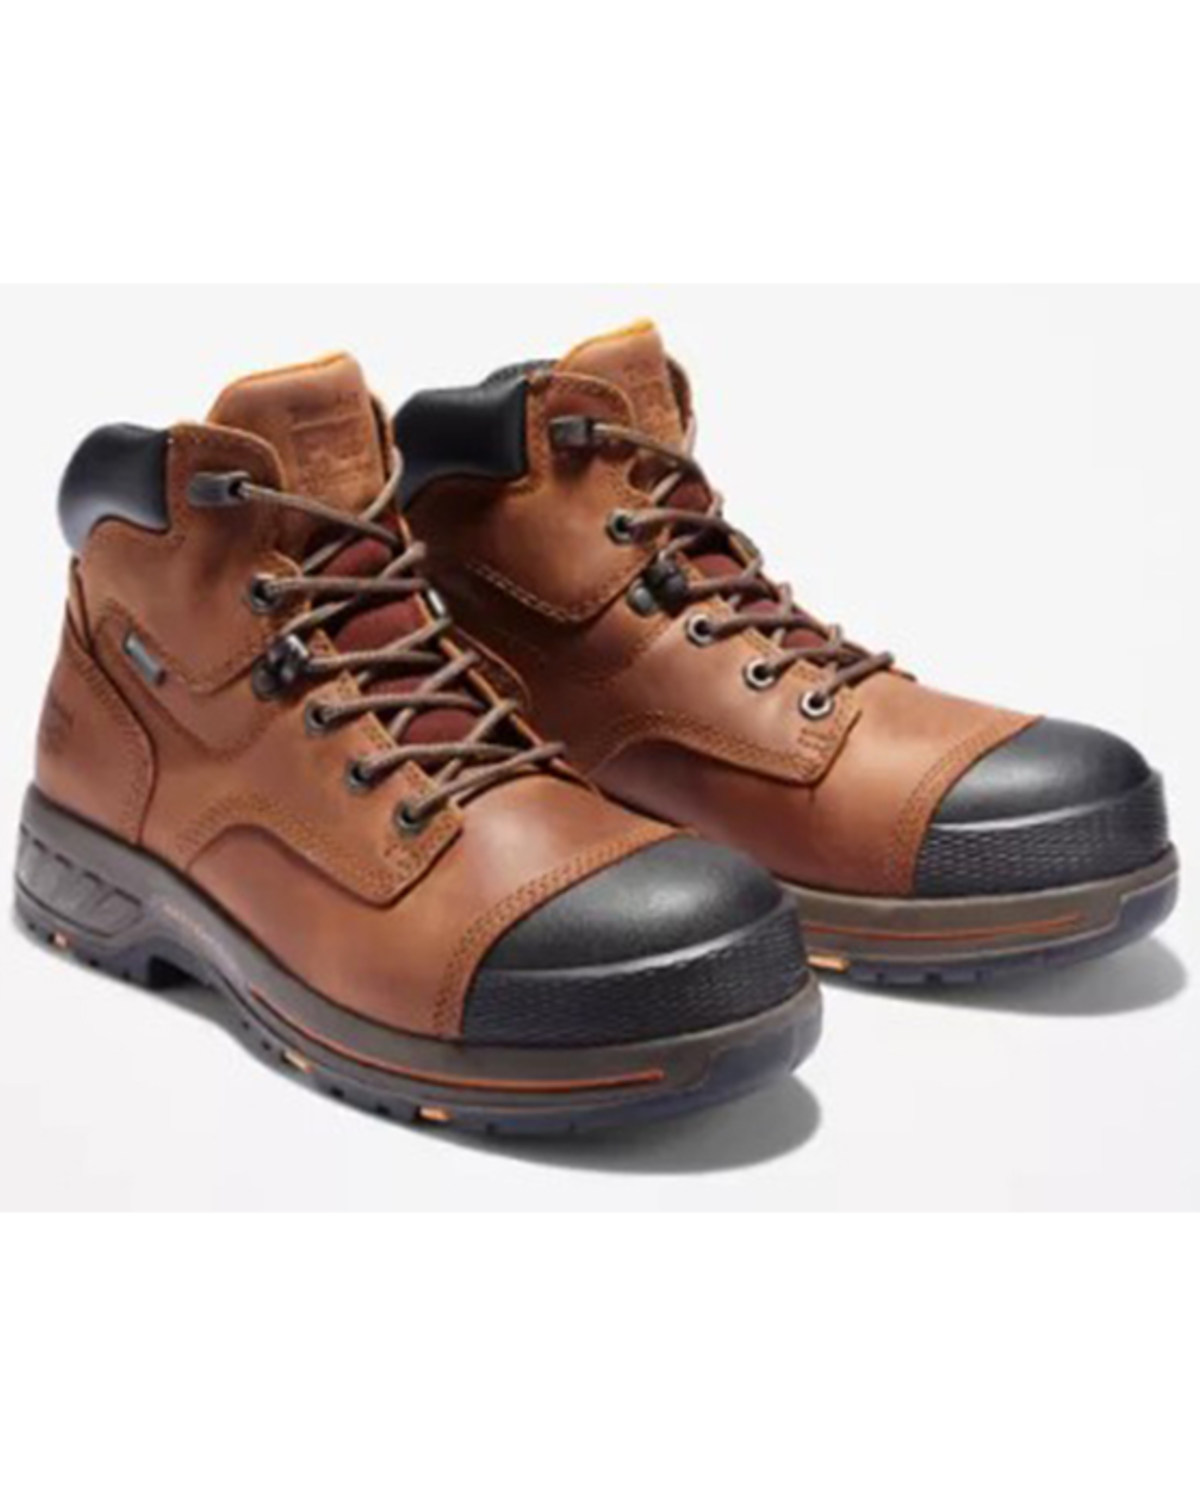 Timberland Men's Helix 6" Lace-Up Waterproof Work Boots - Soft Toe